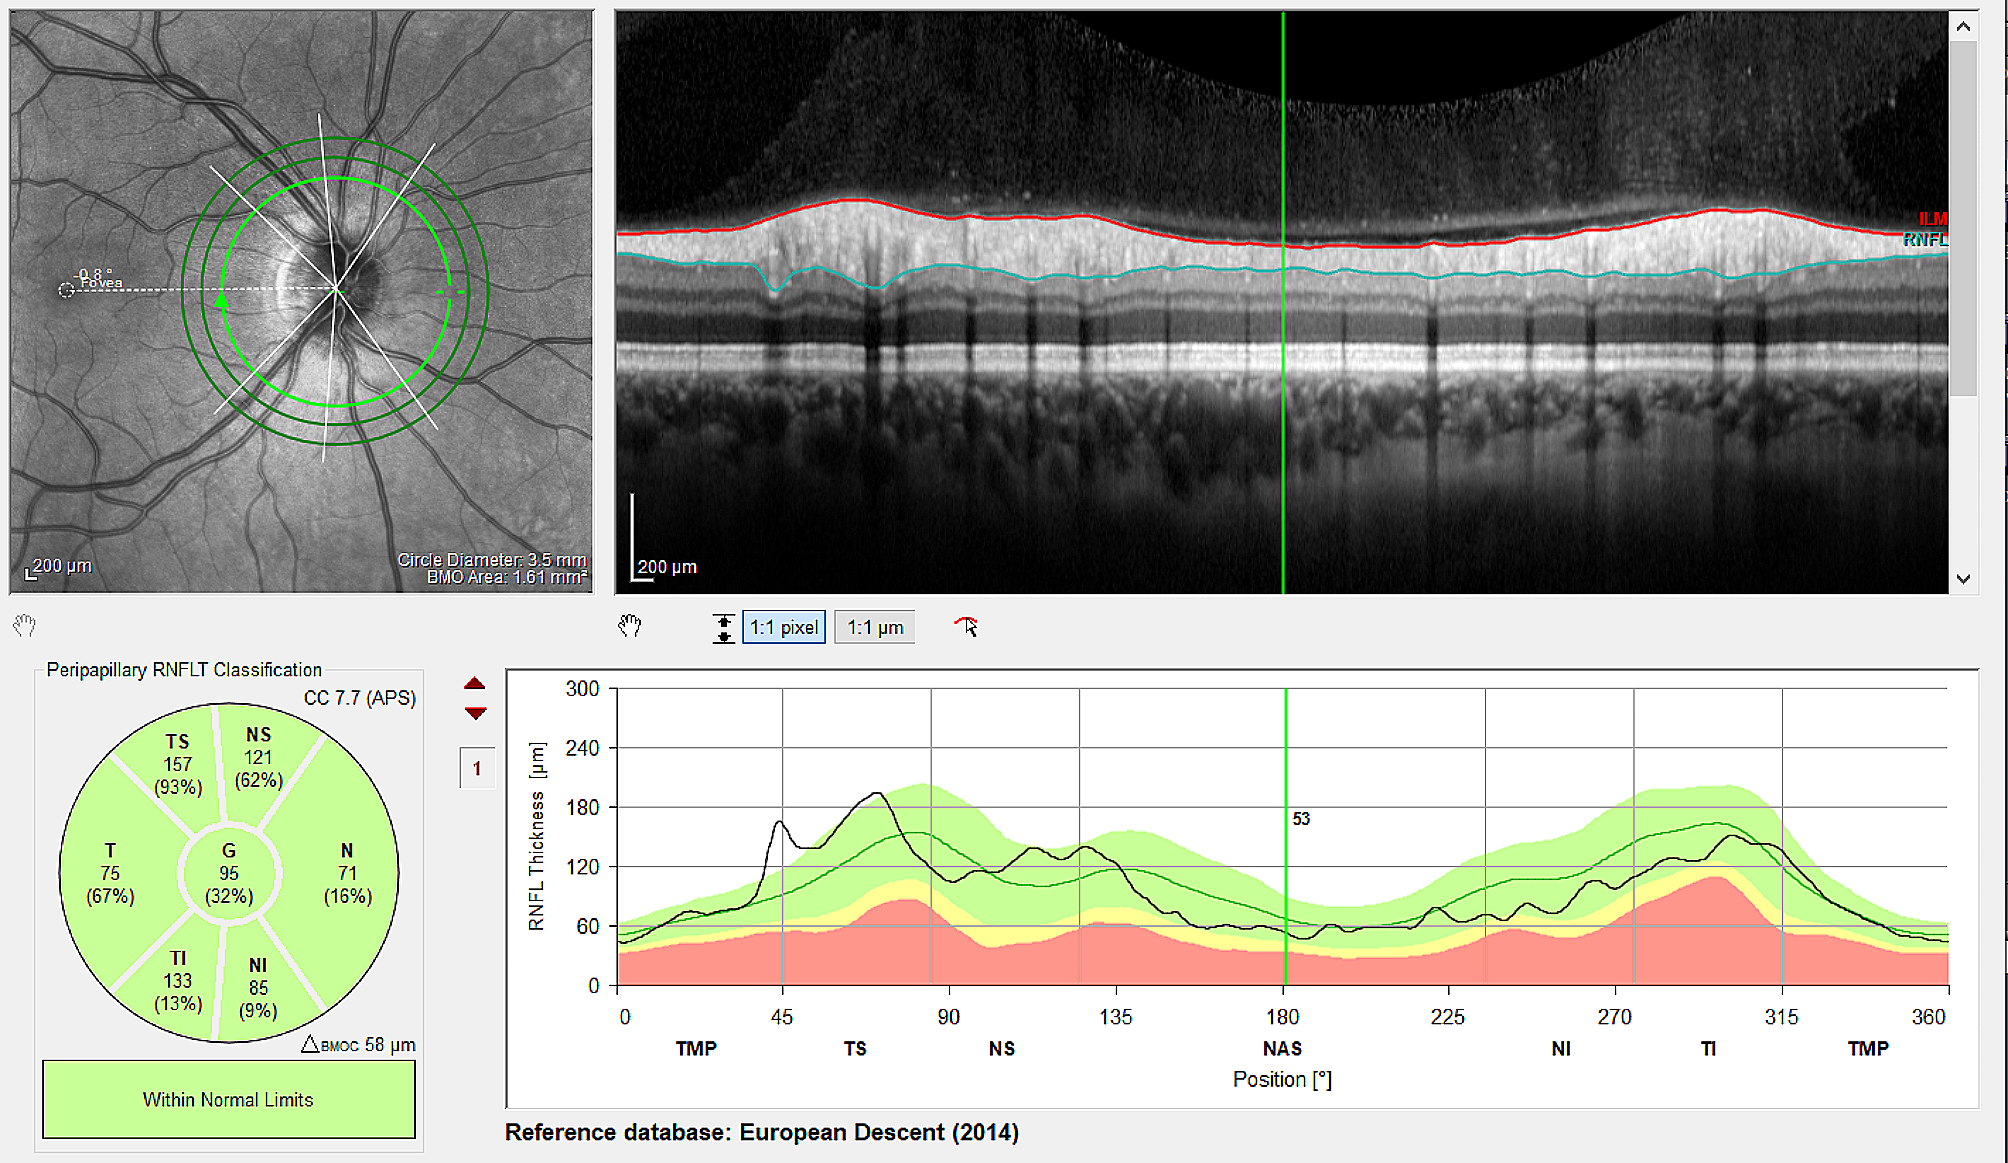 Effect of intravitreal injections due to neovascular age-related macular degeneration on retinal nerve fiber layer thickness and minimum rim width: a cross sectional study